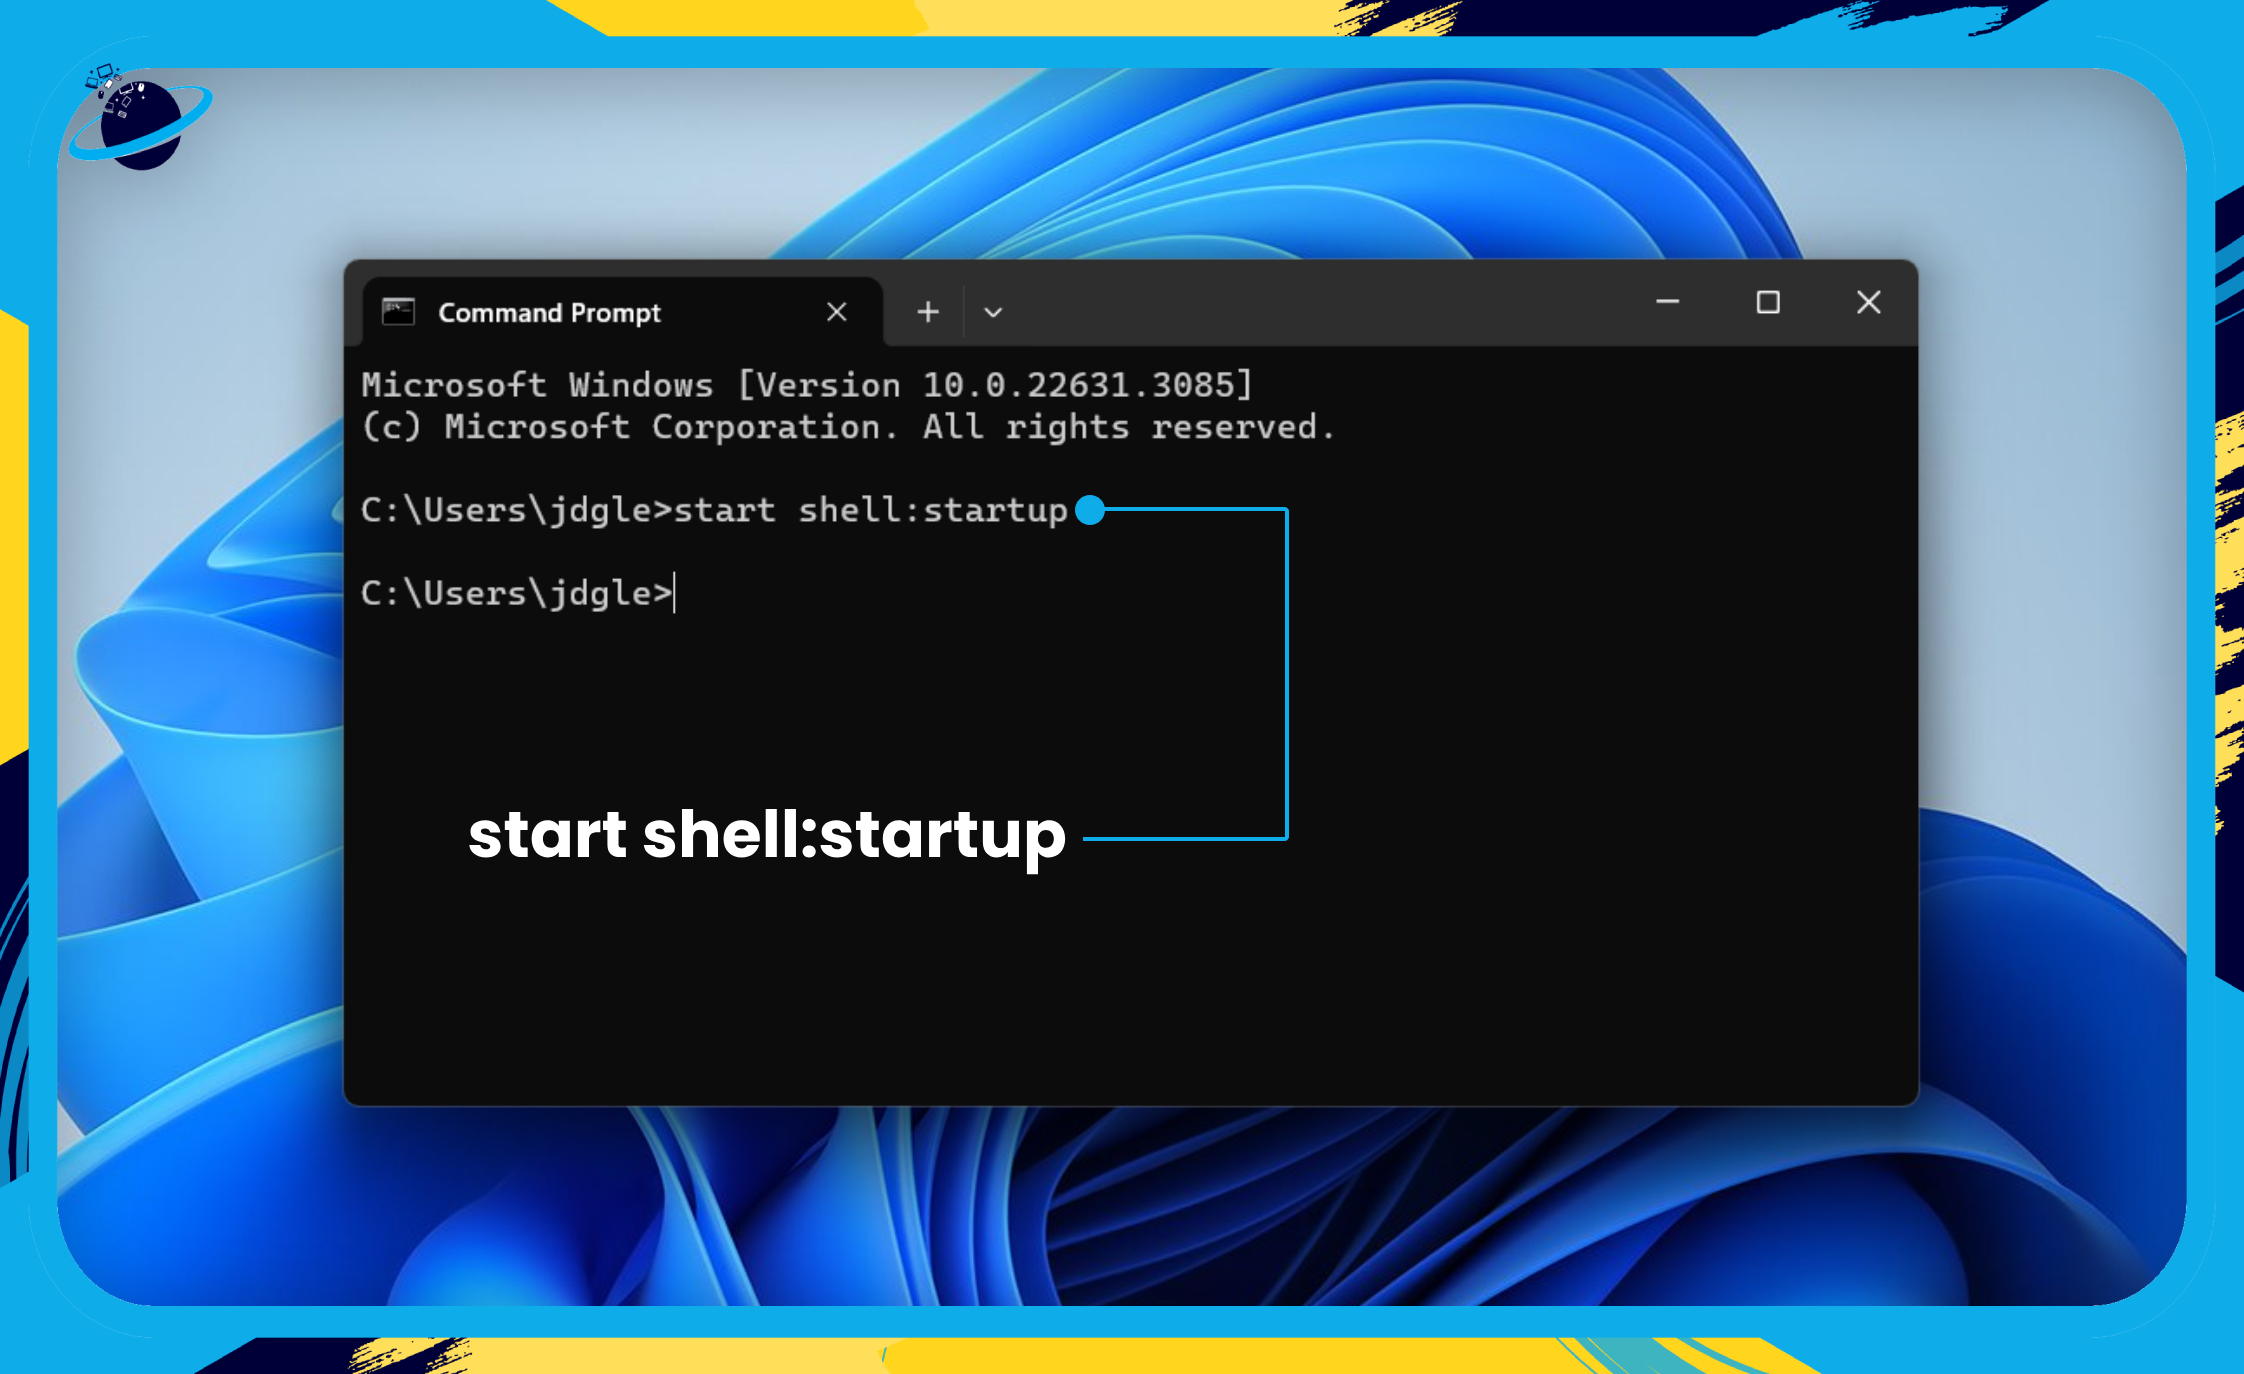 In Command Prompt, type "start shell:startup" then hit Enter.